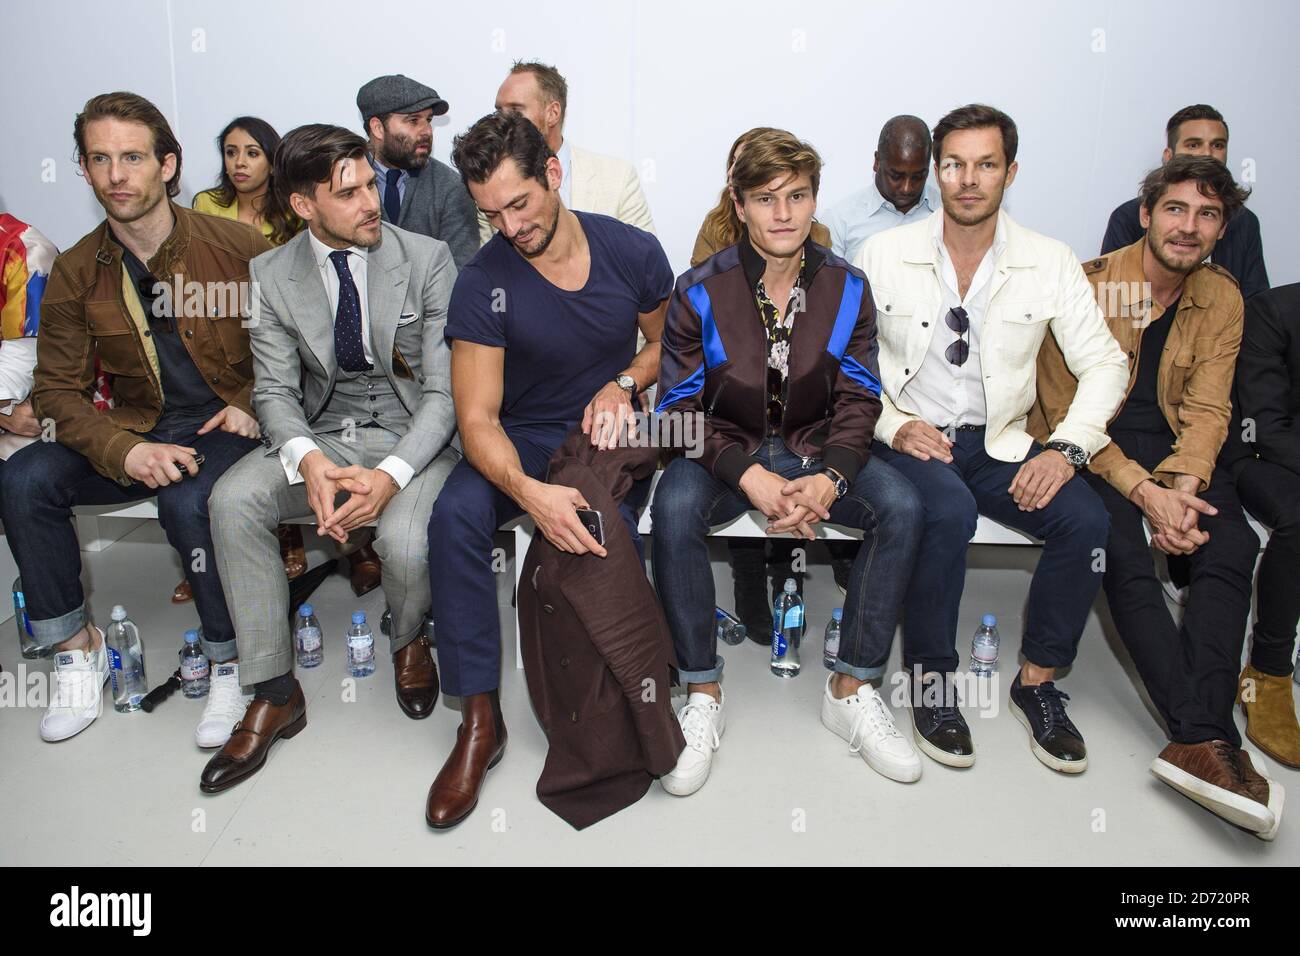 David Gandy, Oliver Cheshire, Paul Sculfor and Robert Konjic on the front row at the Christopher Raeburn fashion show, held at the BFC Venue on 180 Strand as part of London Collections: Men, Stock Photo